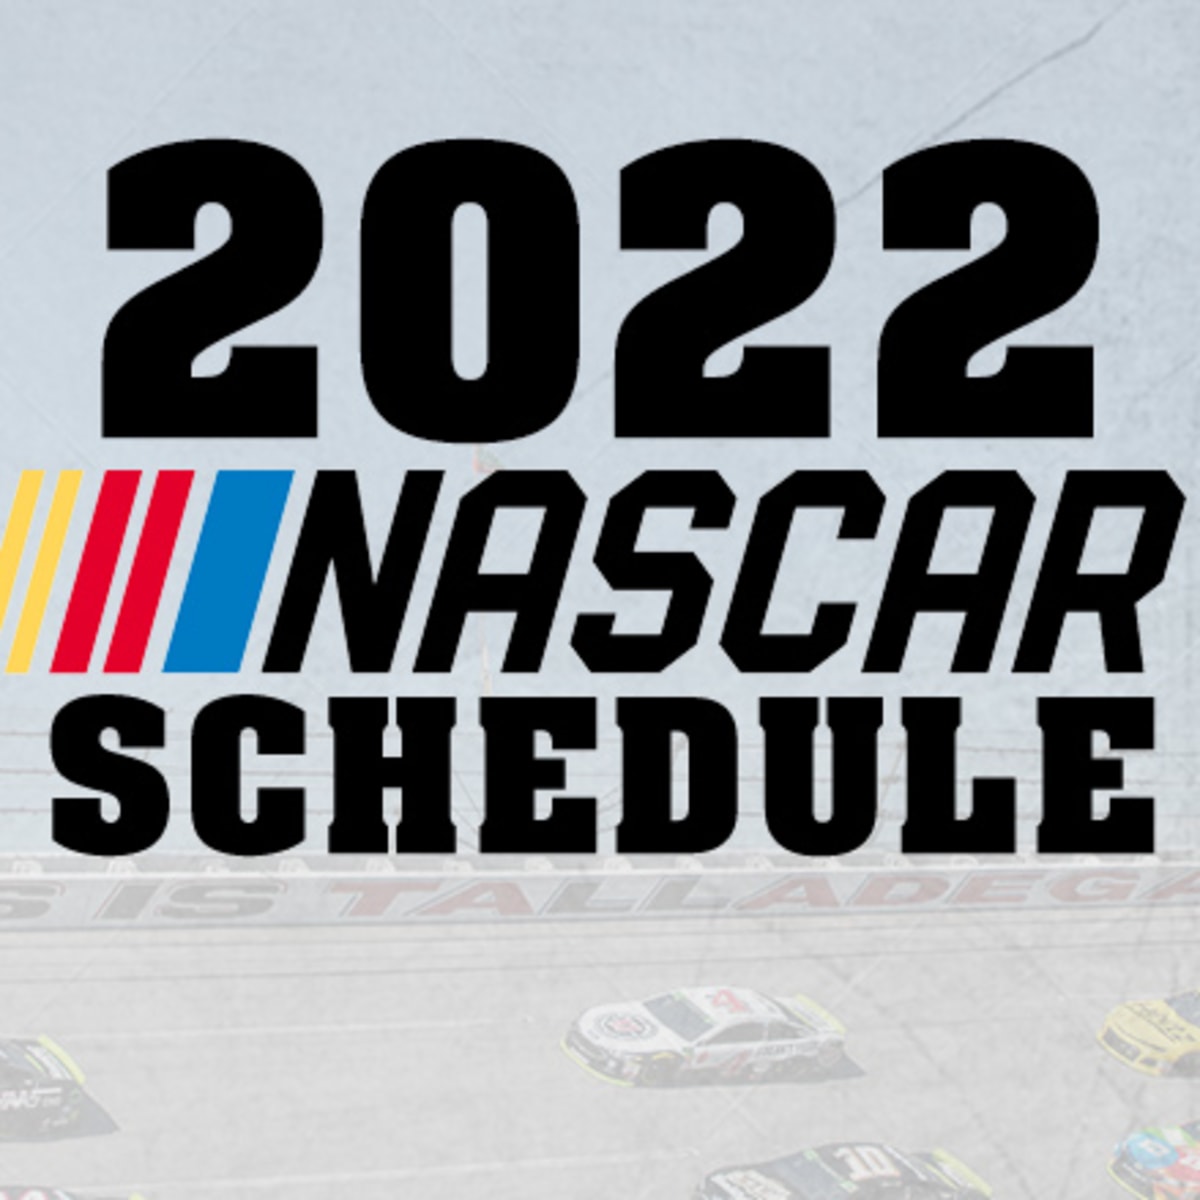 Nascar Schedule For 2022 2022 Nascar Schedule: Nascar Cup Series - Athlonsports.com | Expert  Predictions, Picks, And Previews